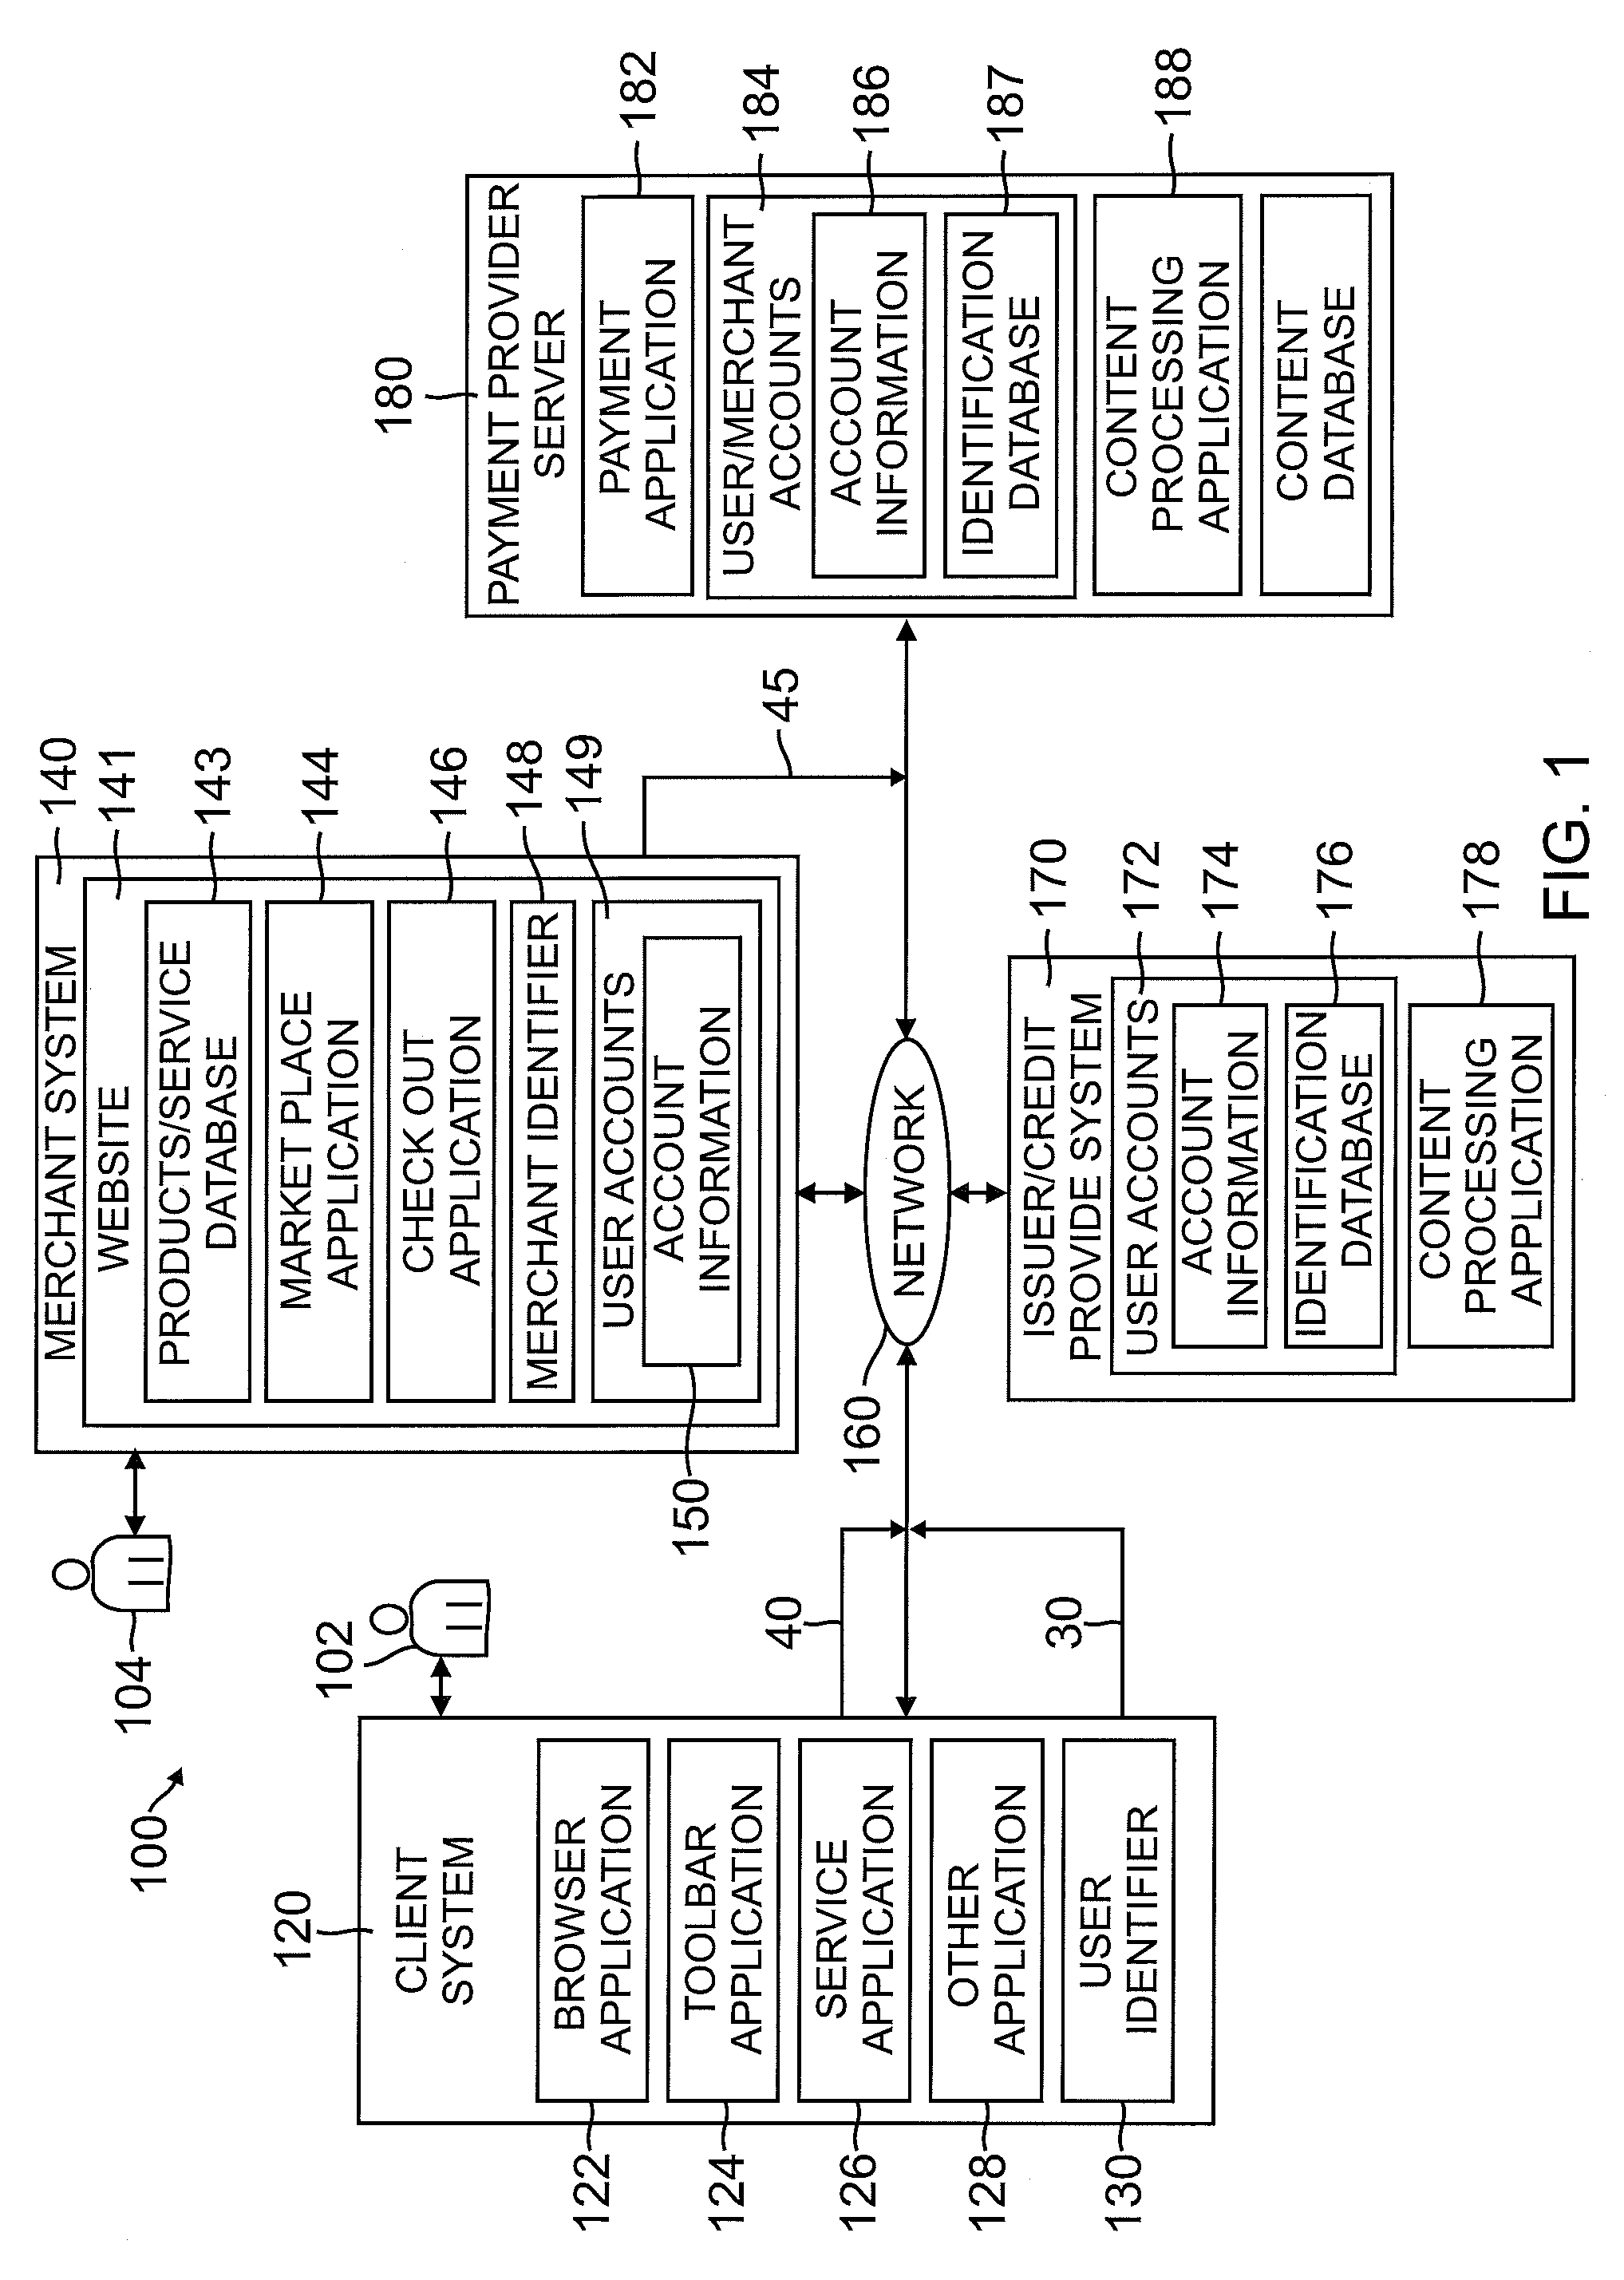 System and method of a passphrase account identifier for use in a network environment